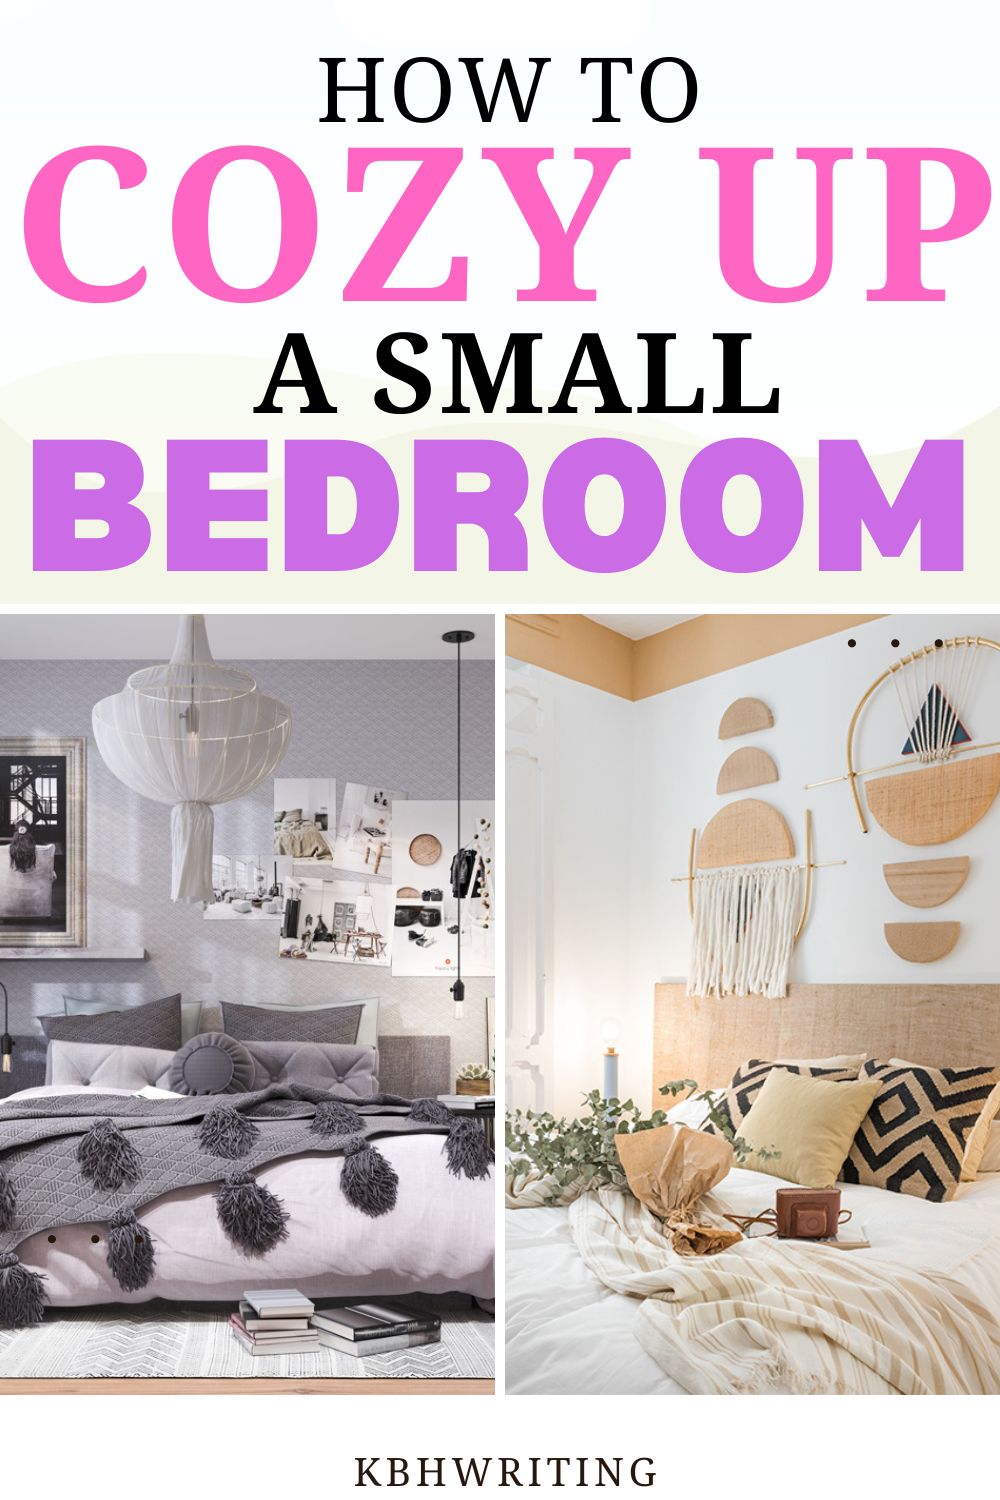 How to Make Bedroom Cozy On a Budget